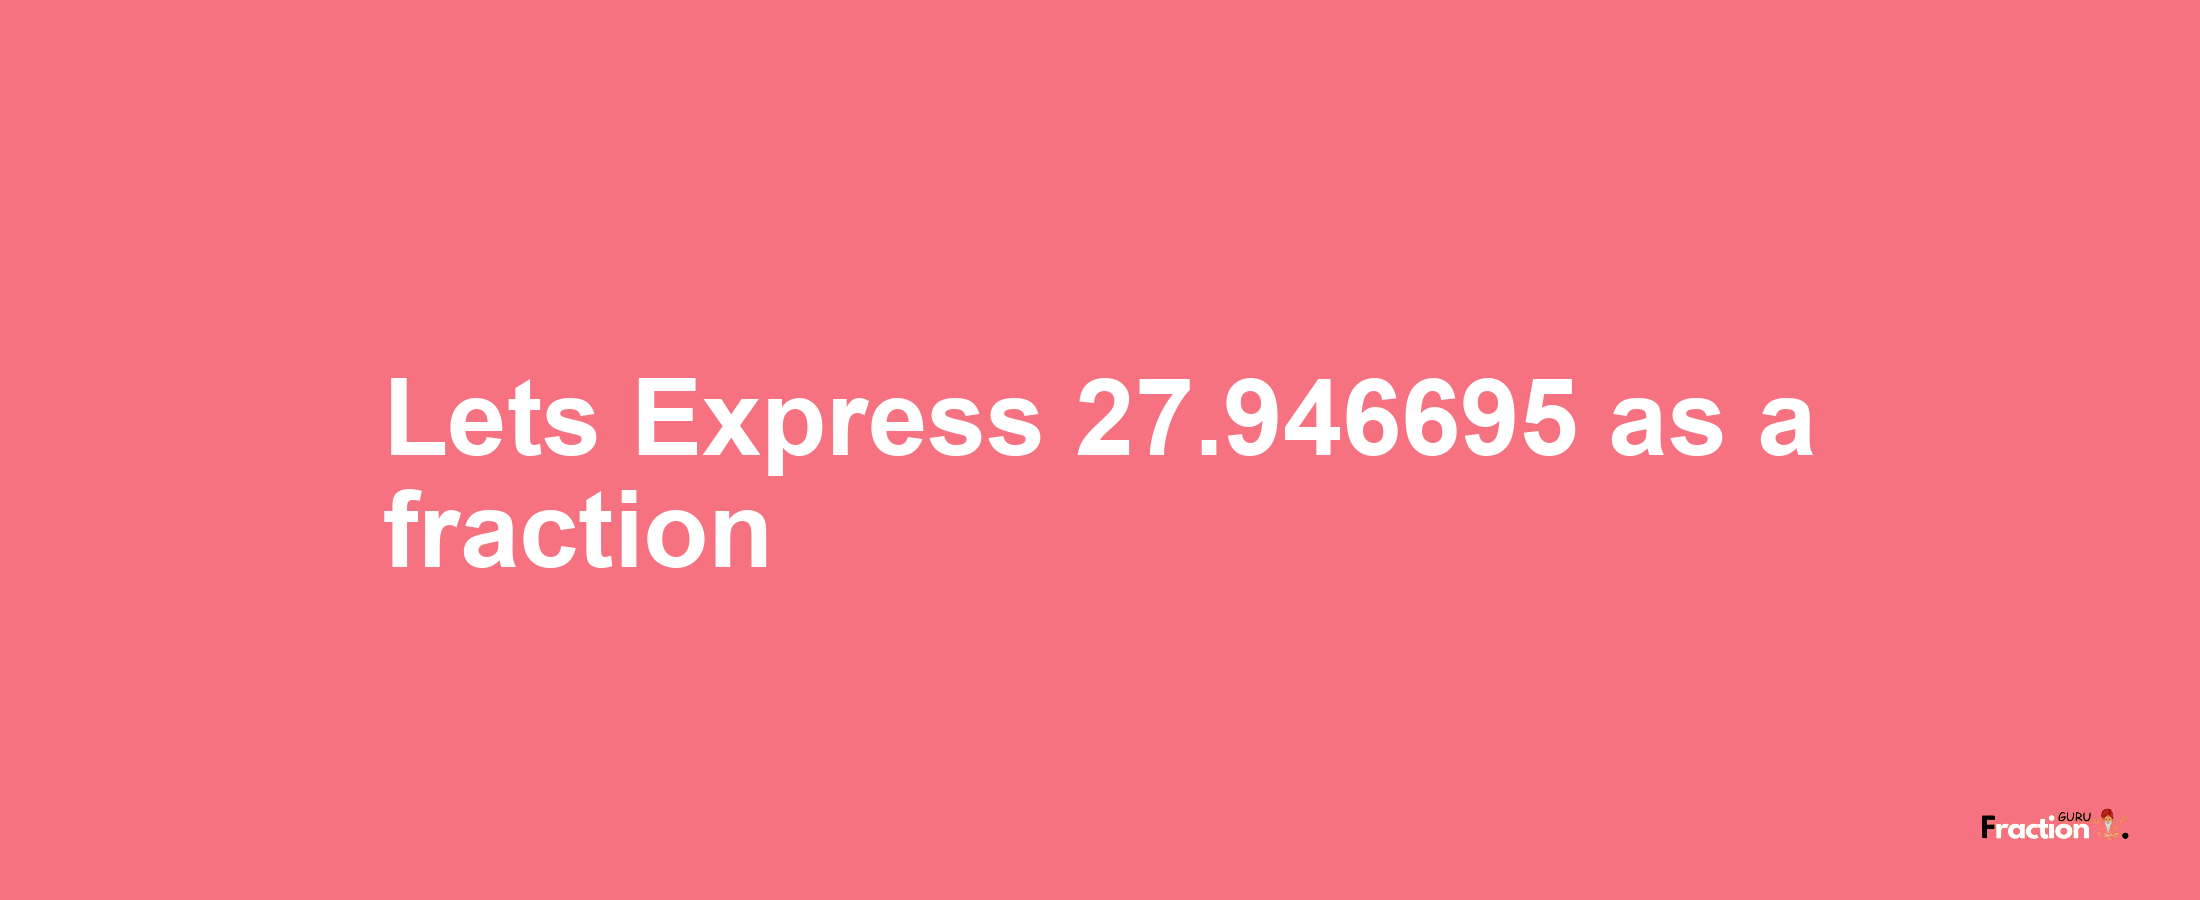 Lets Express 27.946695 as afraction